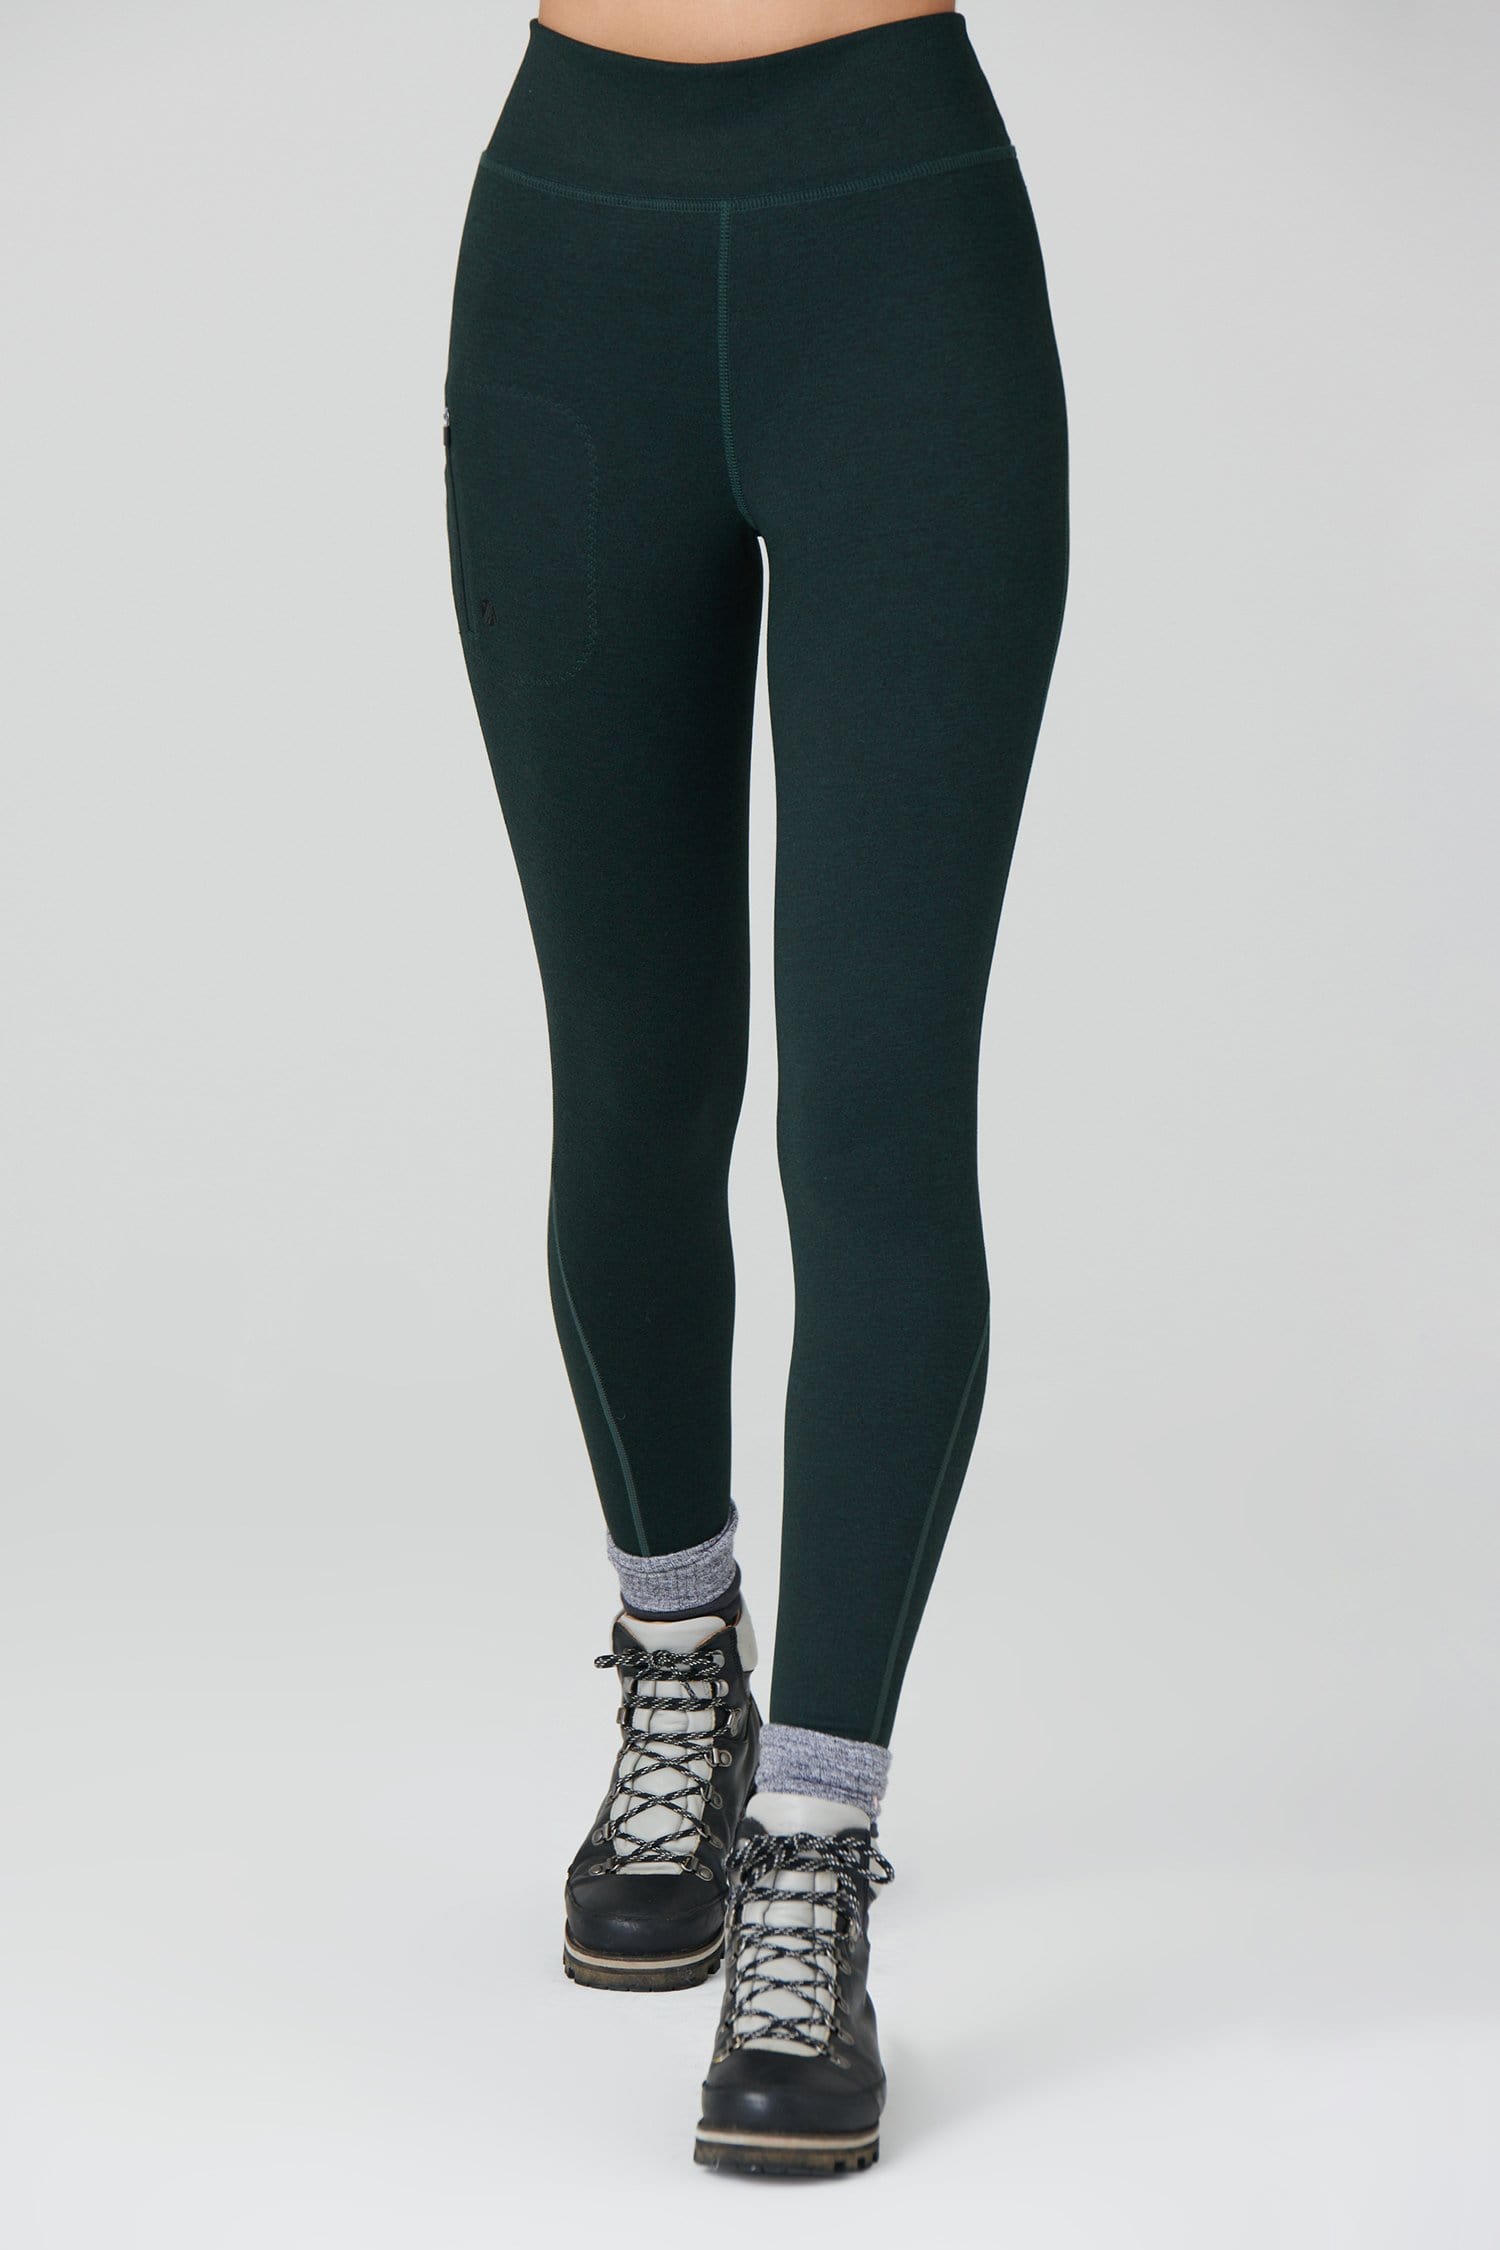 Thermal Outdoor Leggings - Forest Green - Xsmall / Uk8 - Womens - Acai Outdoorwear